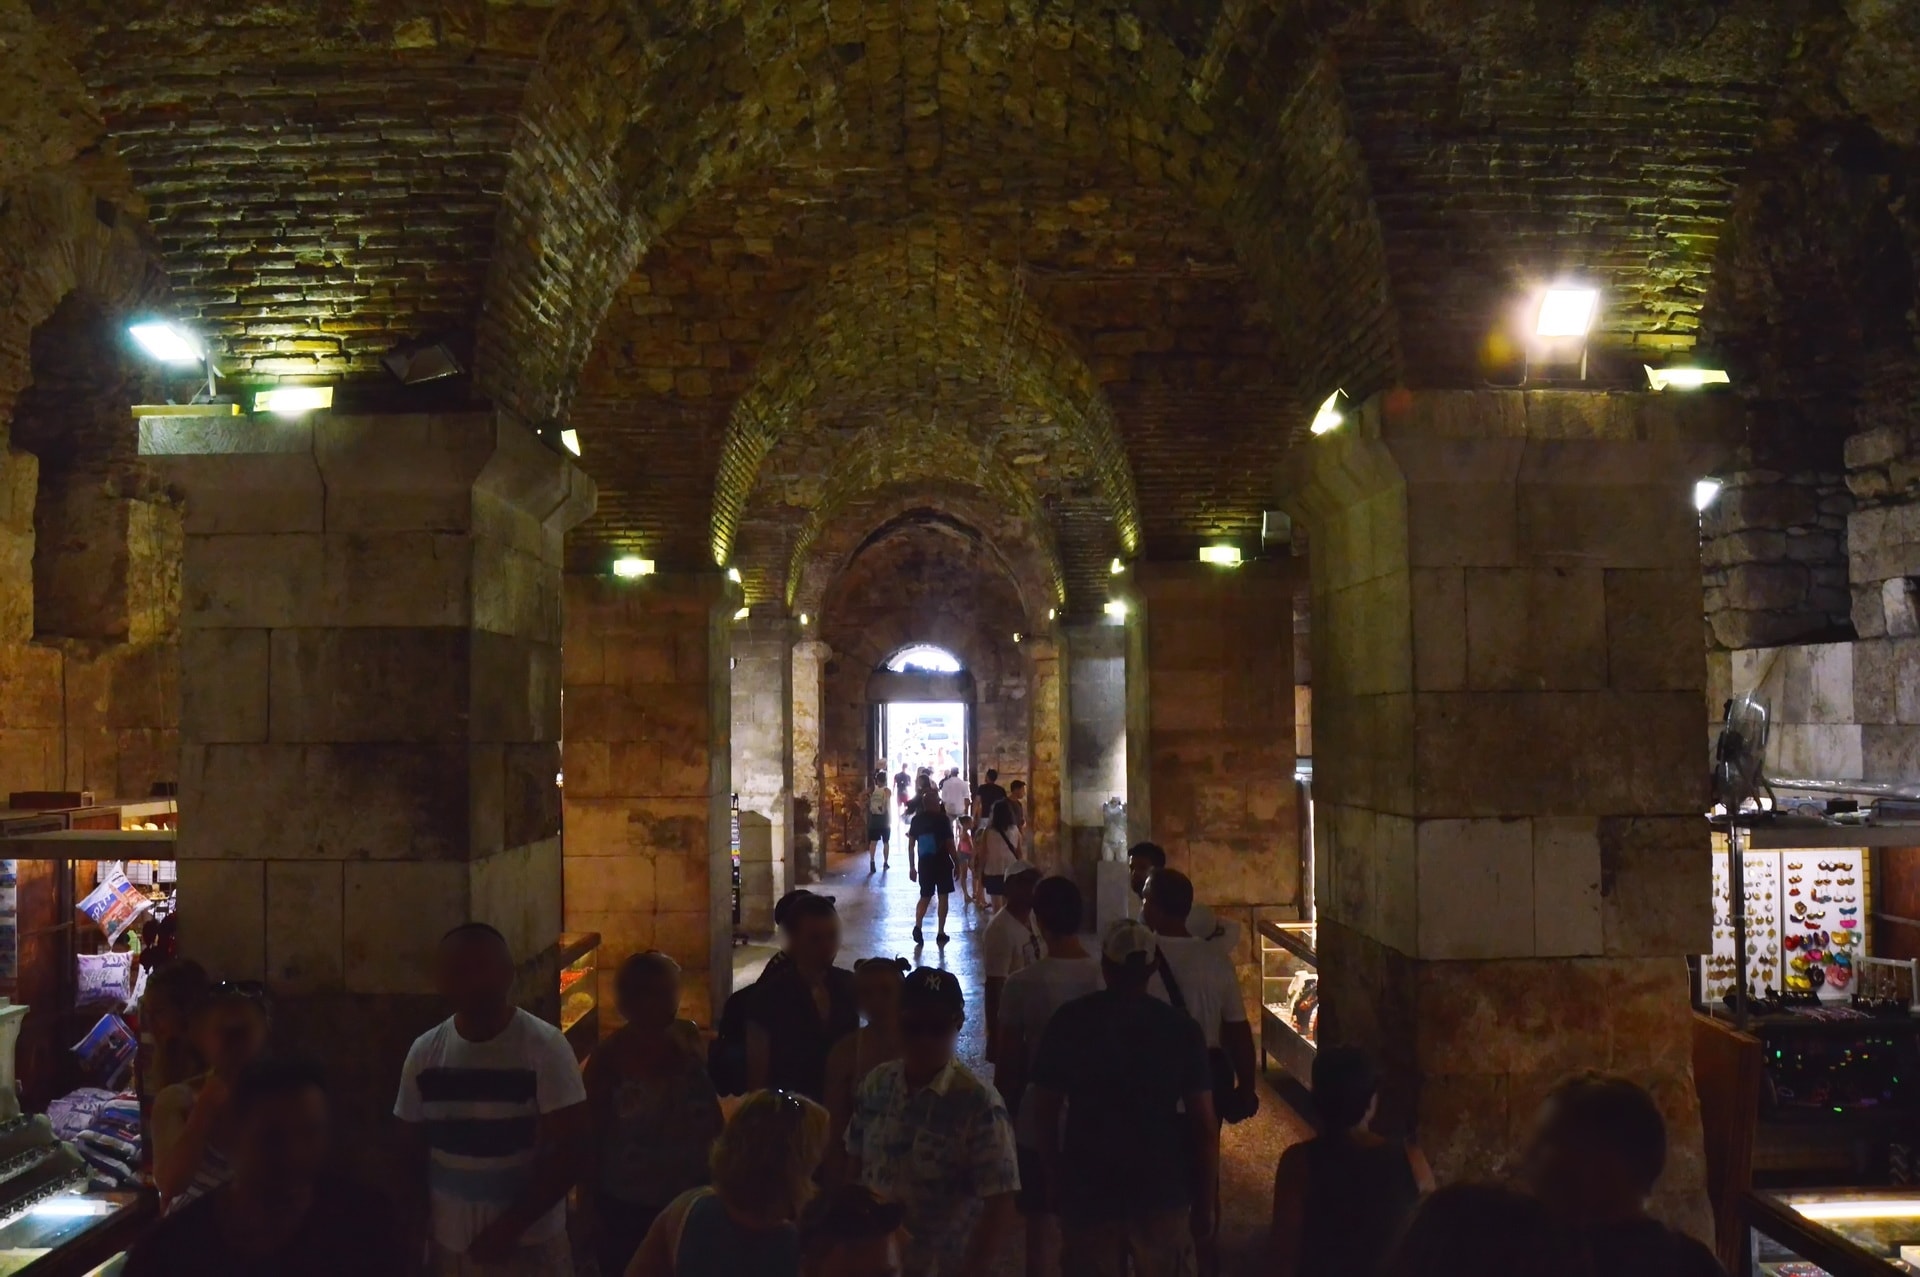 Diocletian's cellars with shops